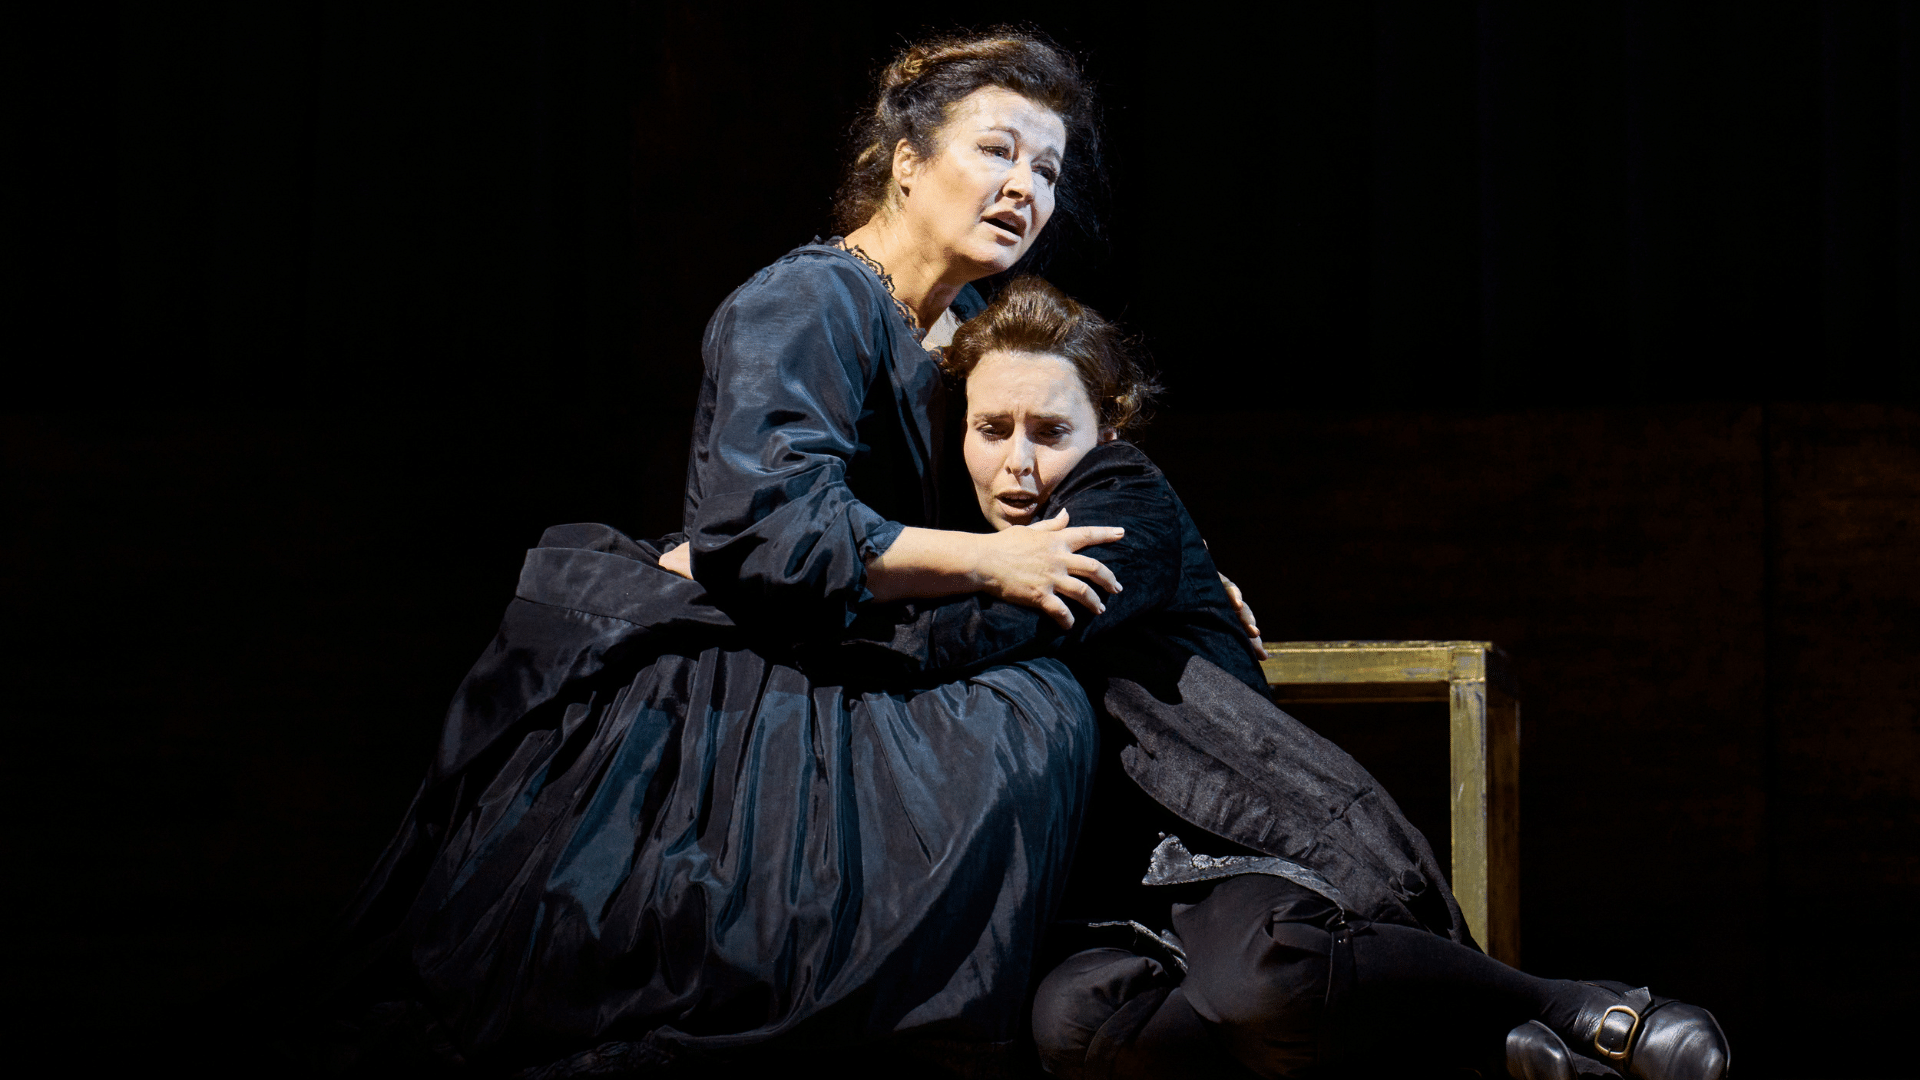 ETO: Giulio Cesare production shot - Two women in black dresses embrace while kneeling on the ground. They look sorrowful. A small wooden table is just behind them and the background is completely black.